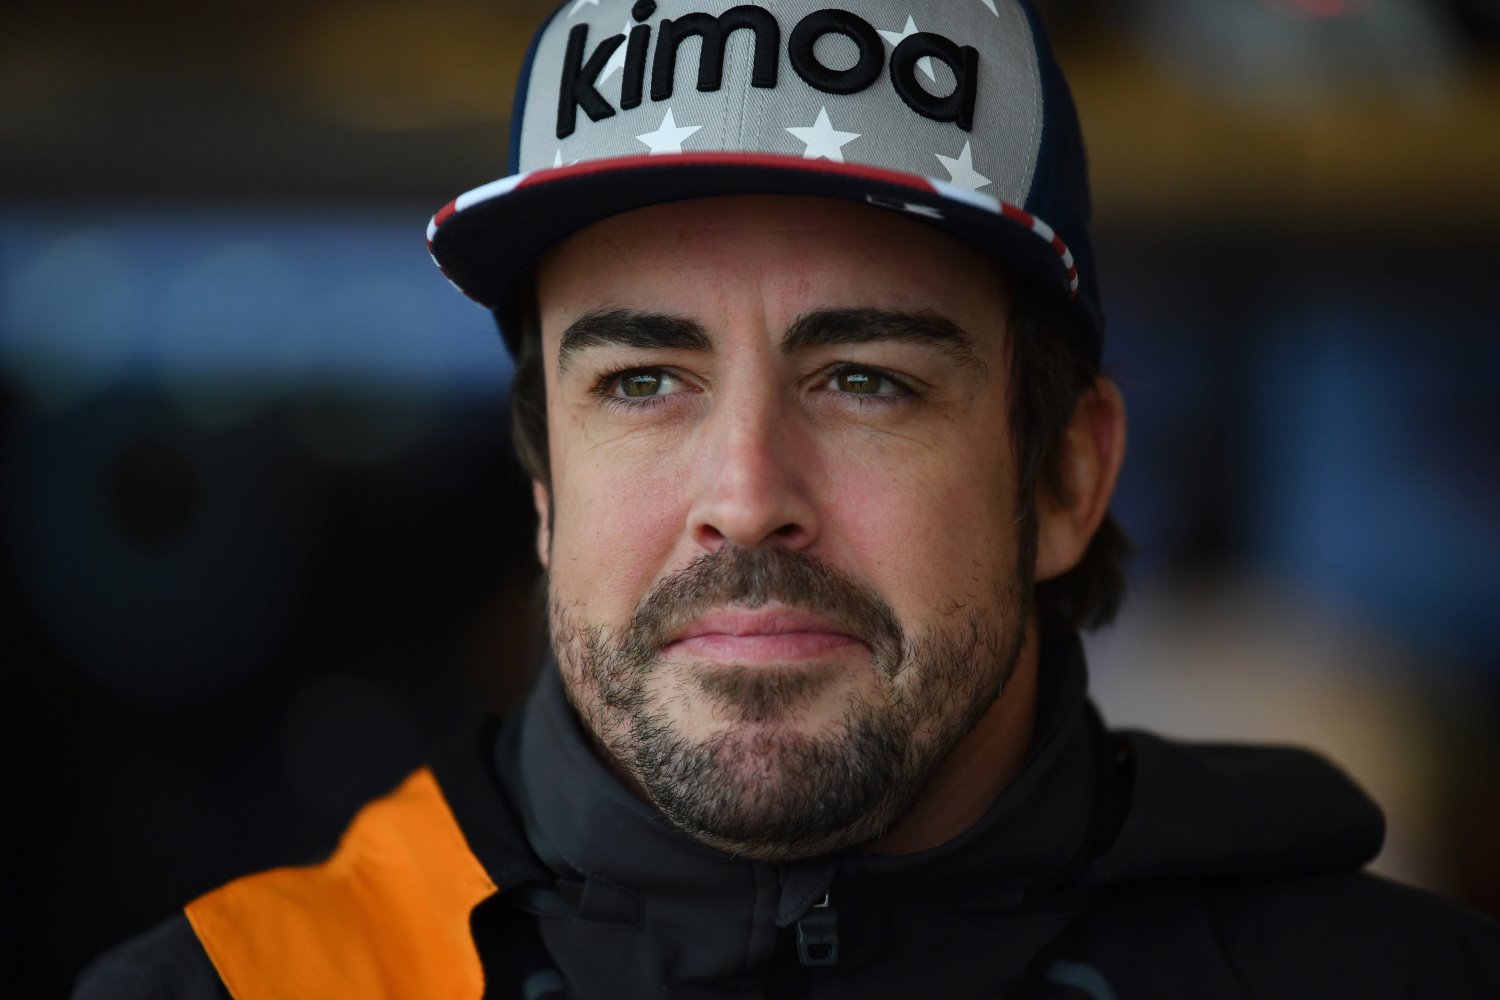 This has to be deeply disappointing to Alonso